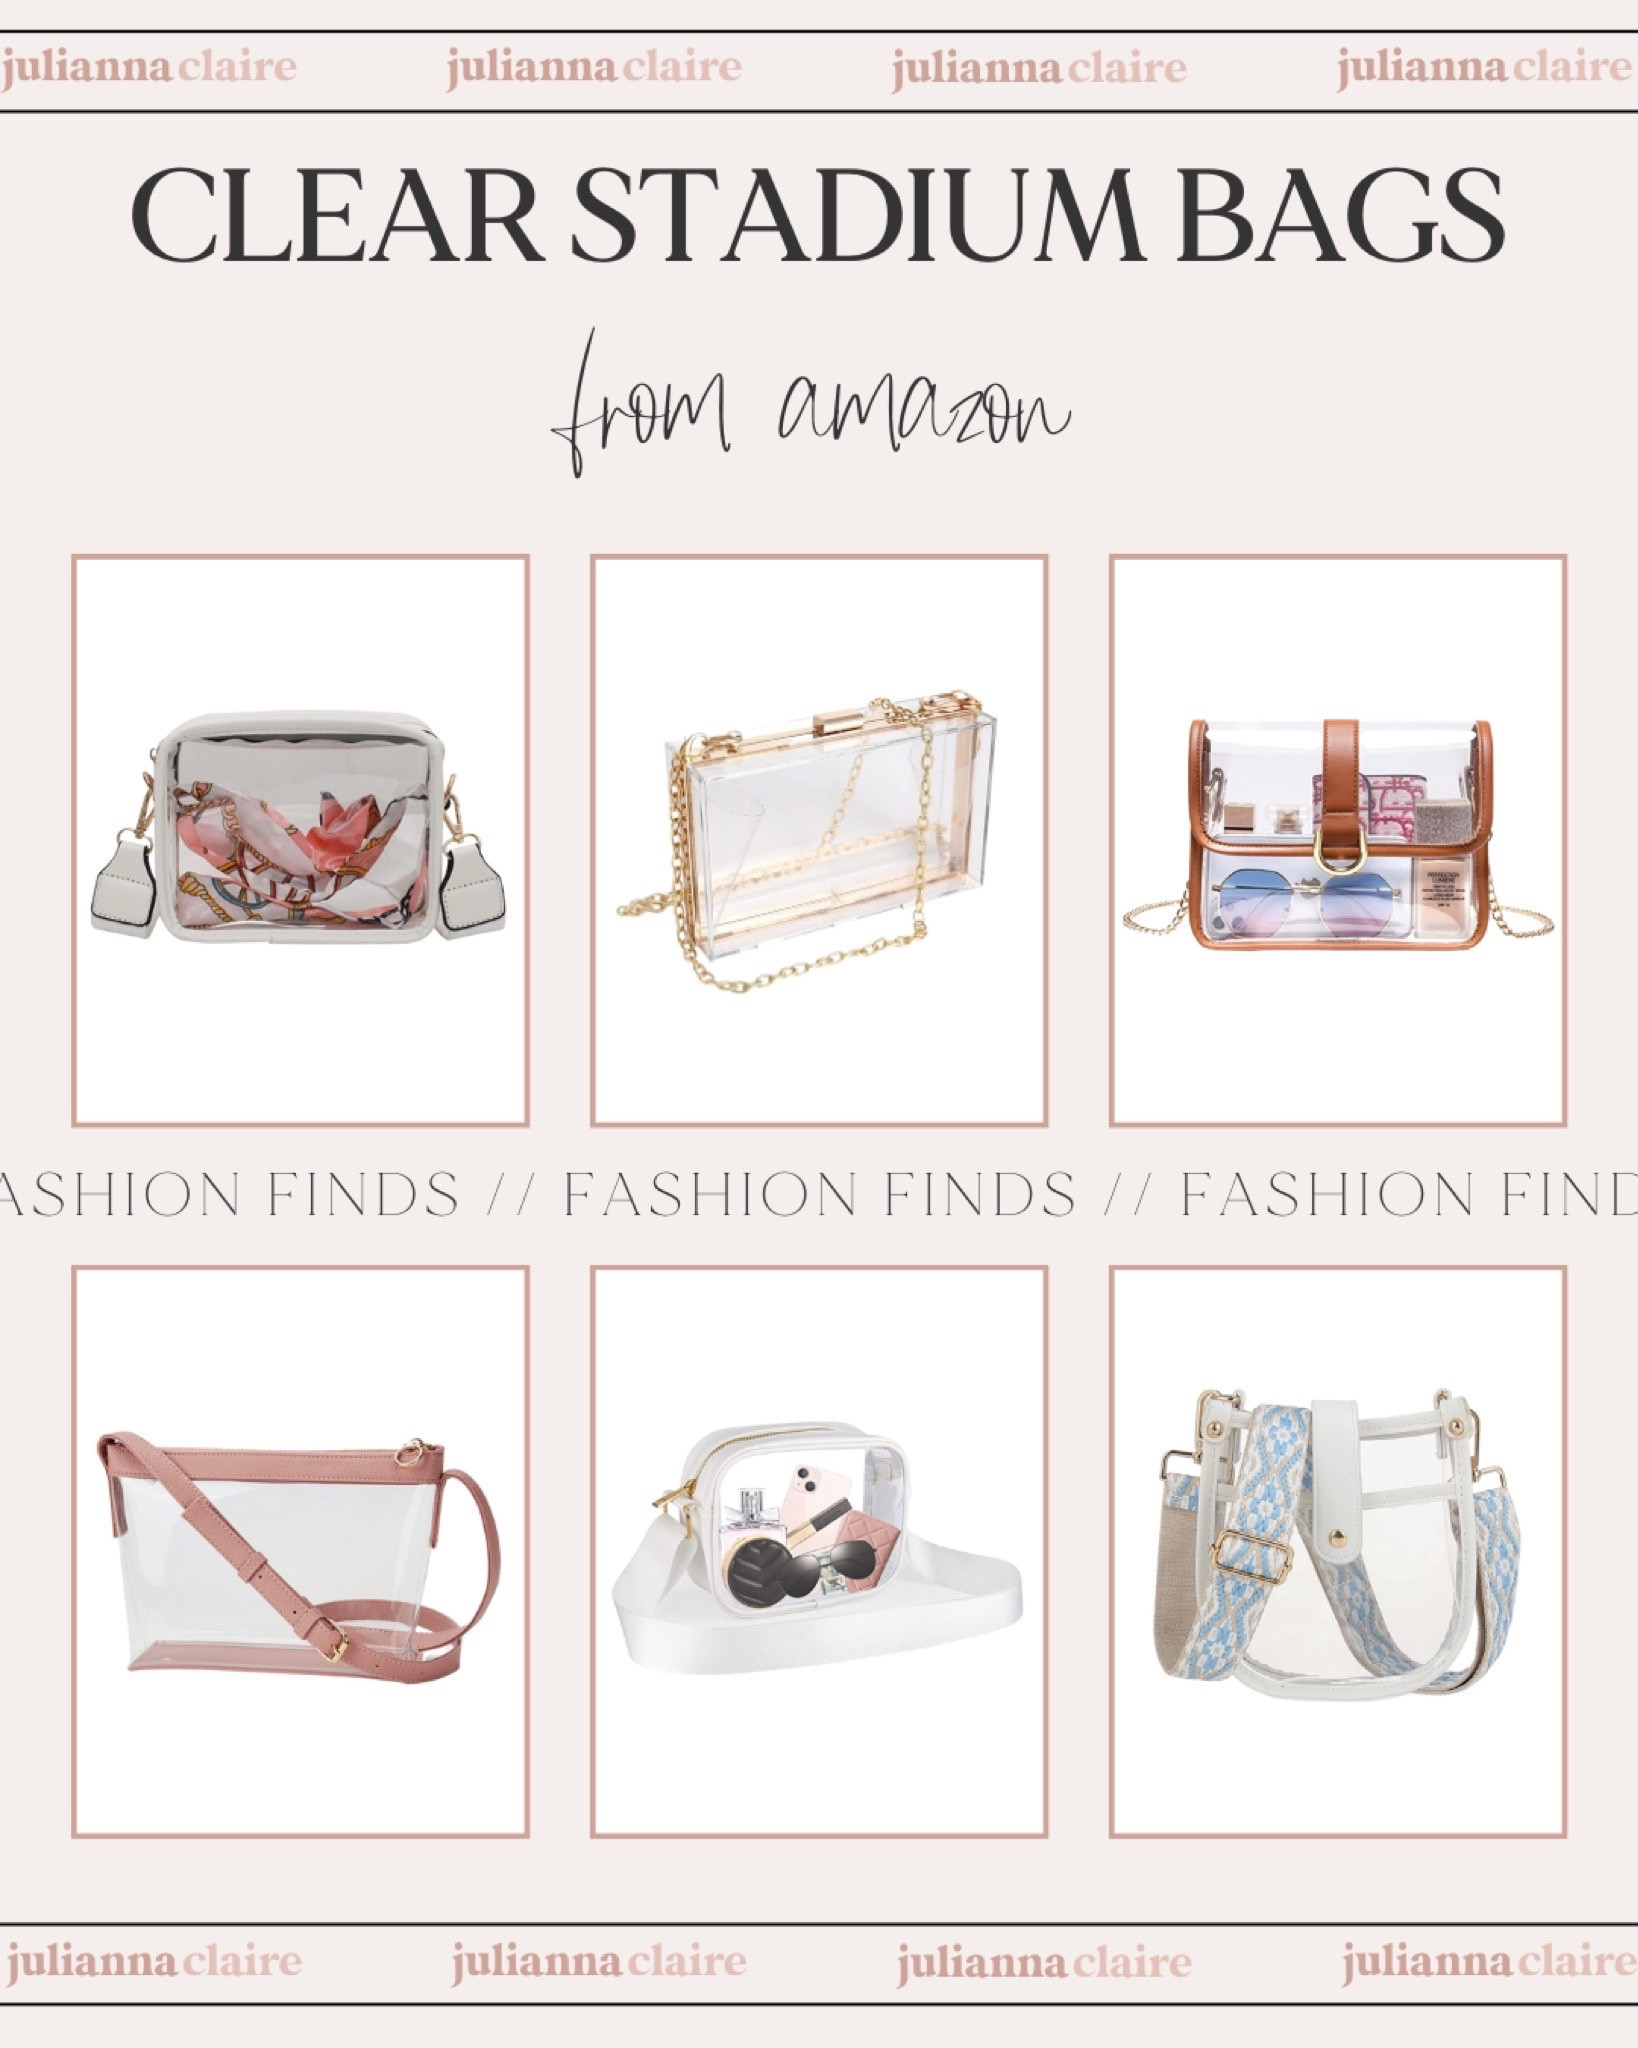  Juoxeepy Clear Bag Stadium Approved Purse Concert